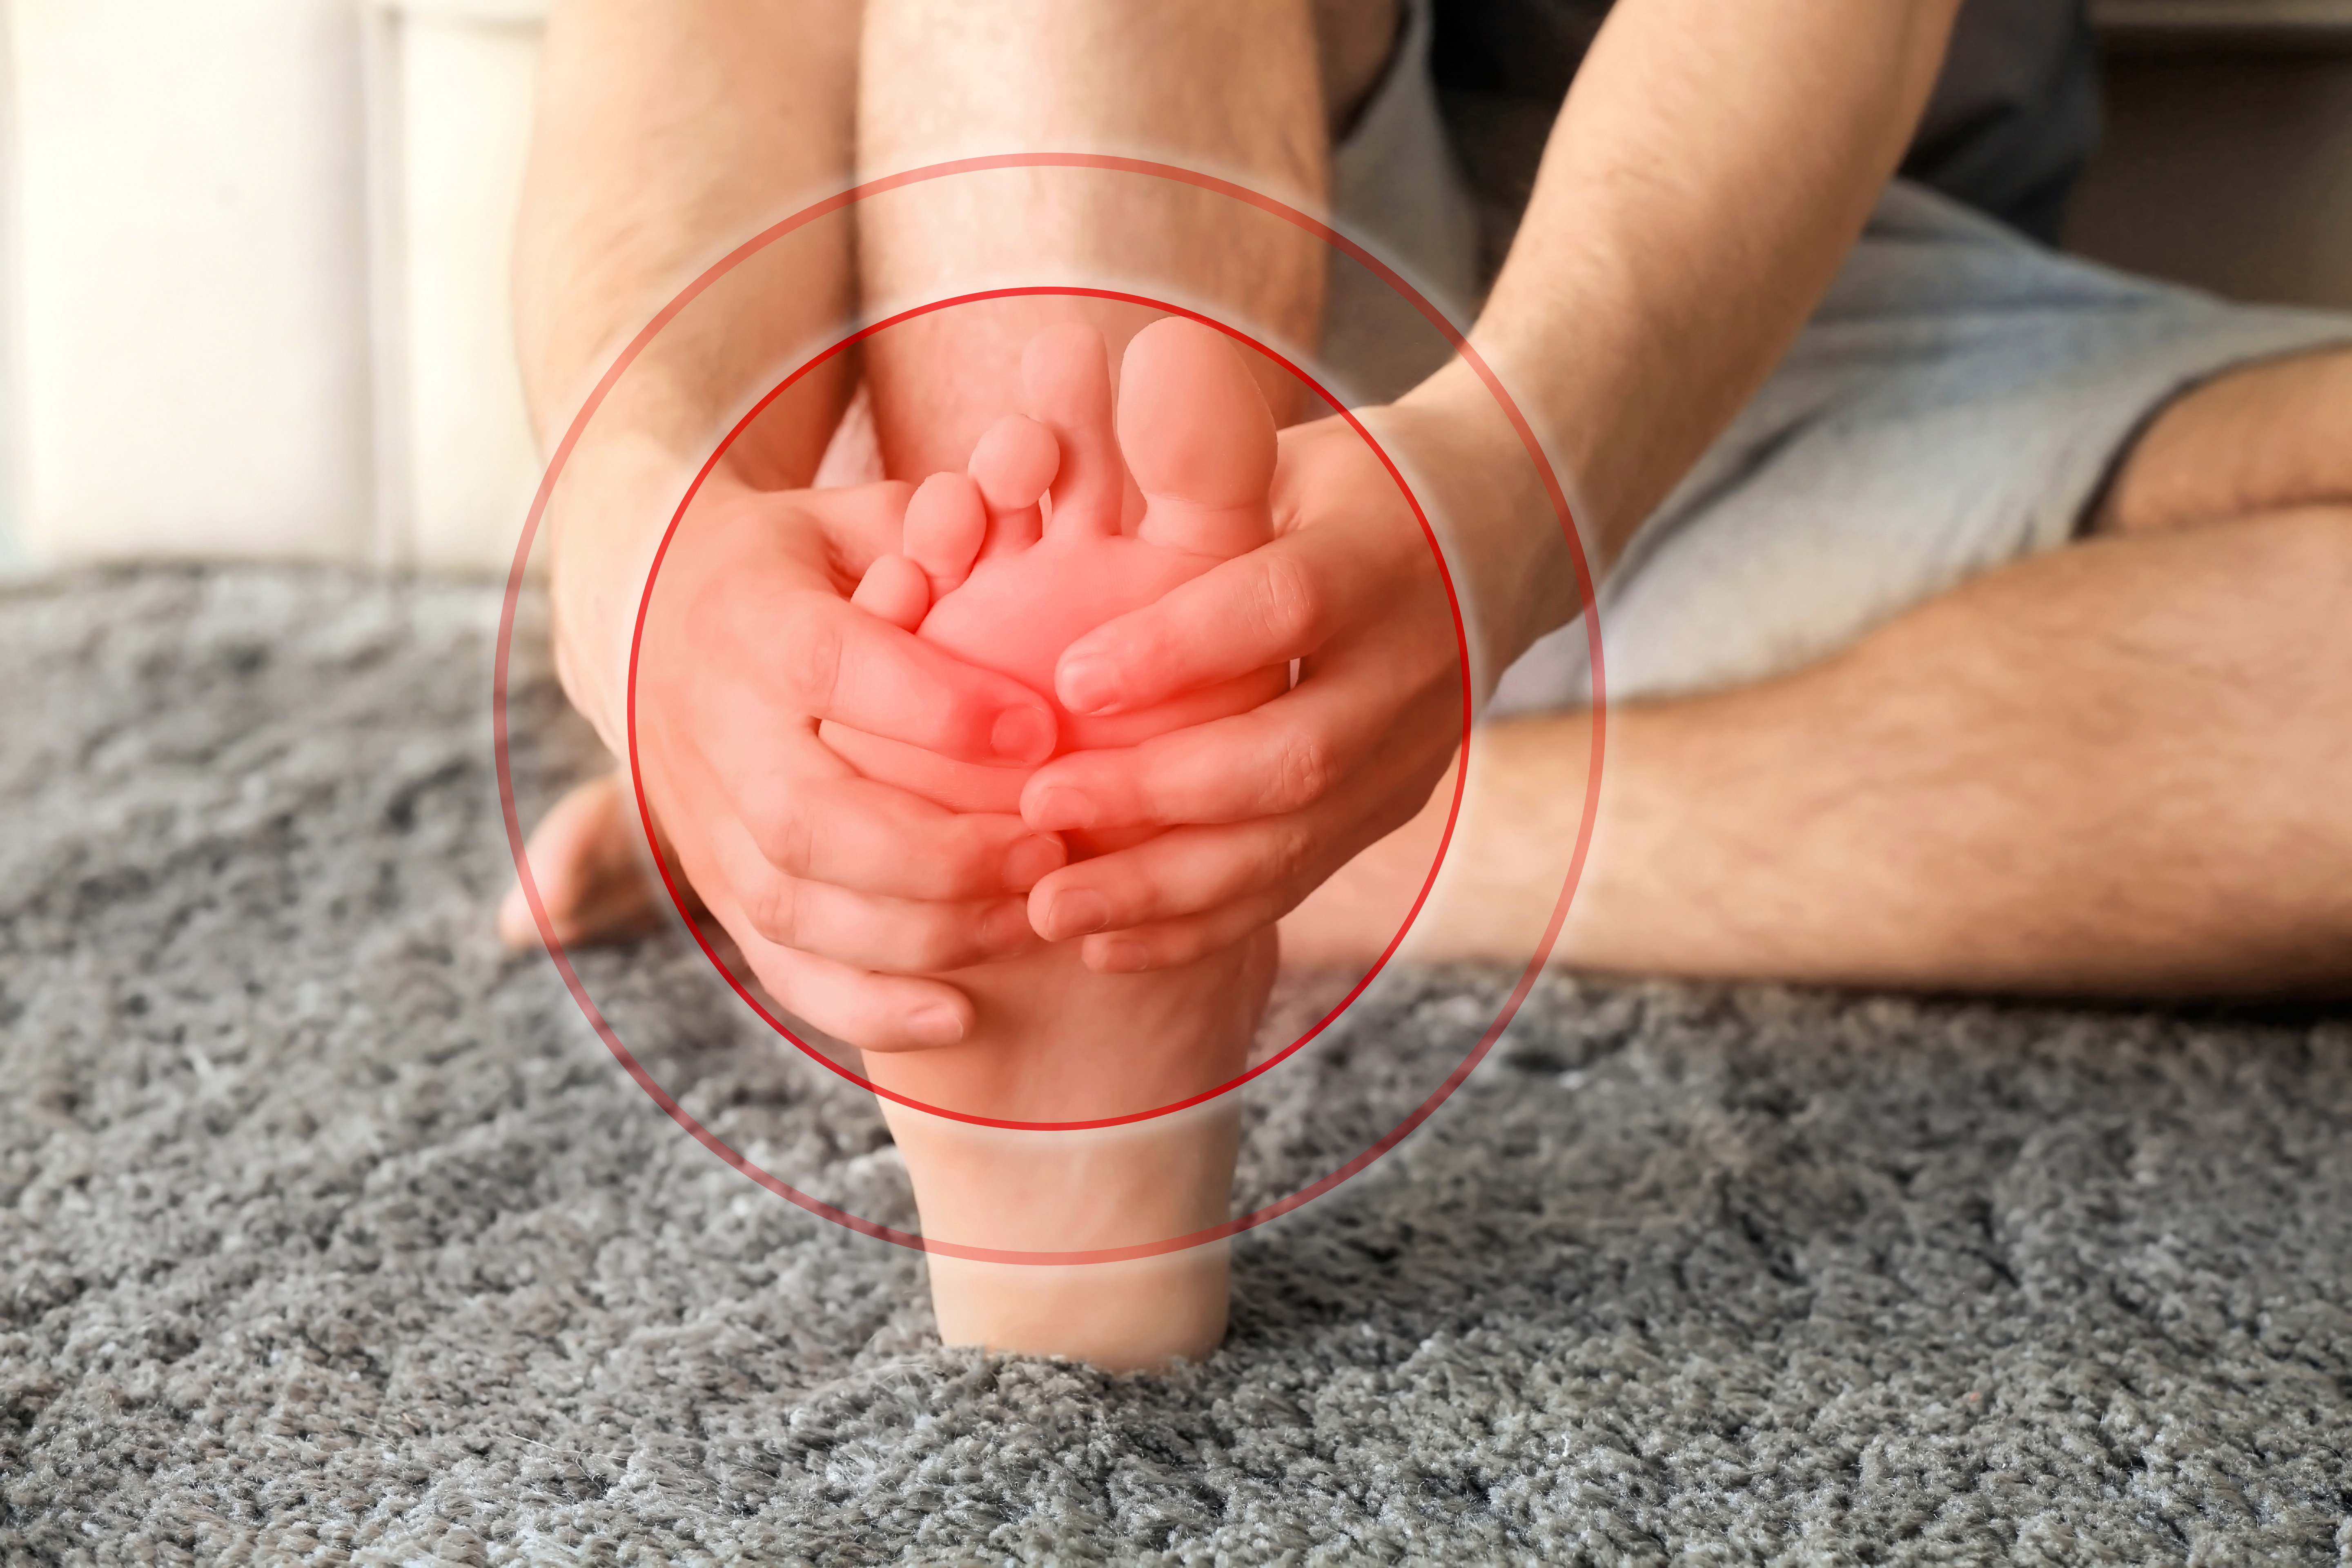 Can Burning Feet Be Caused by a Serious Disease?